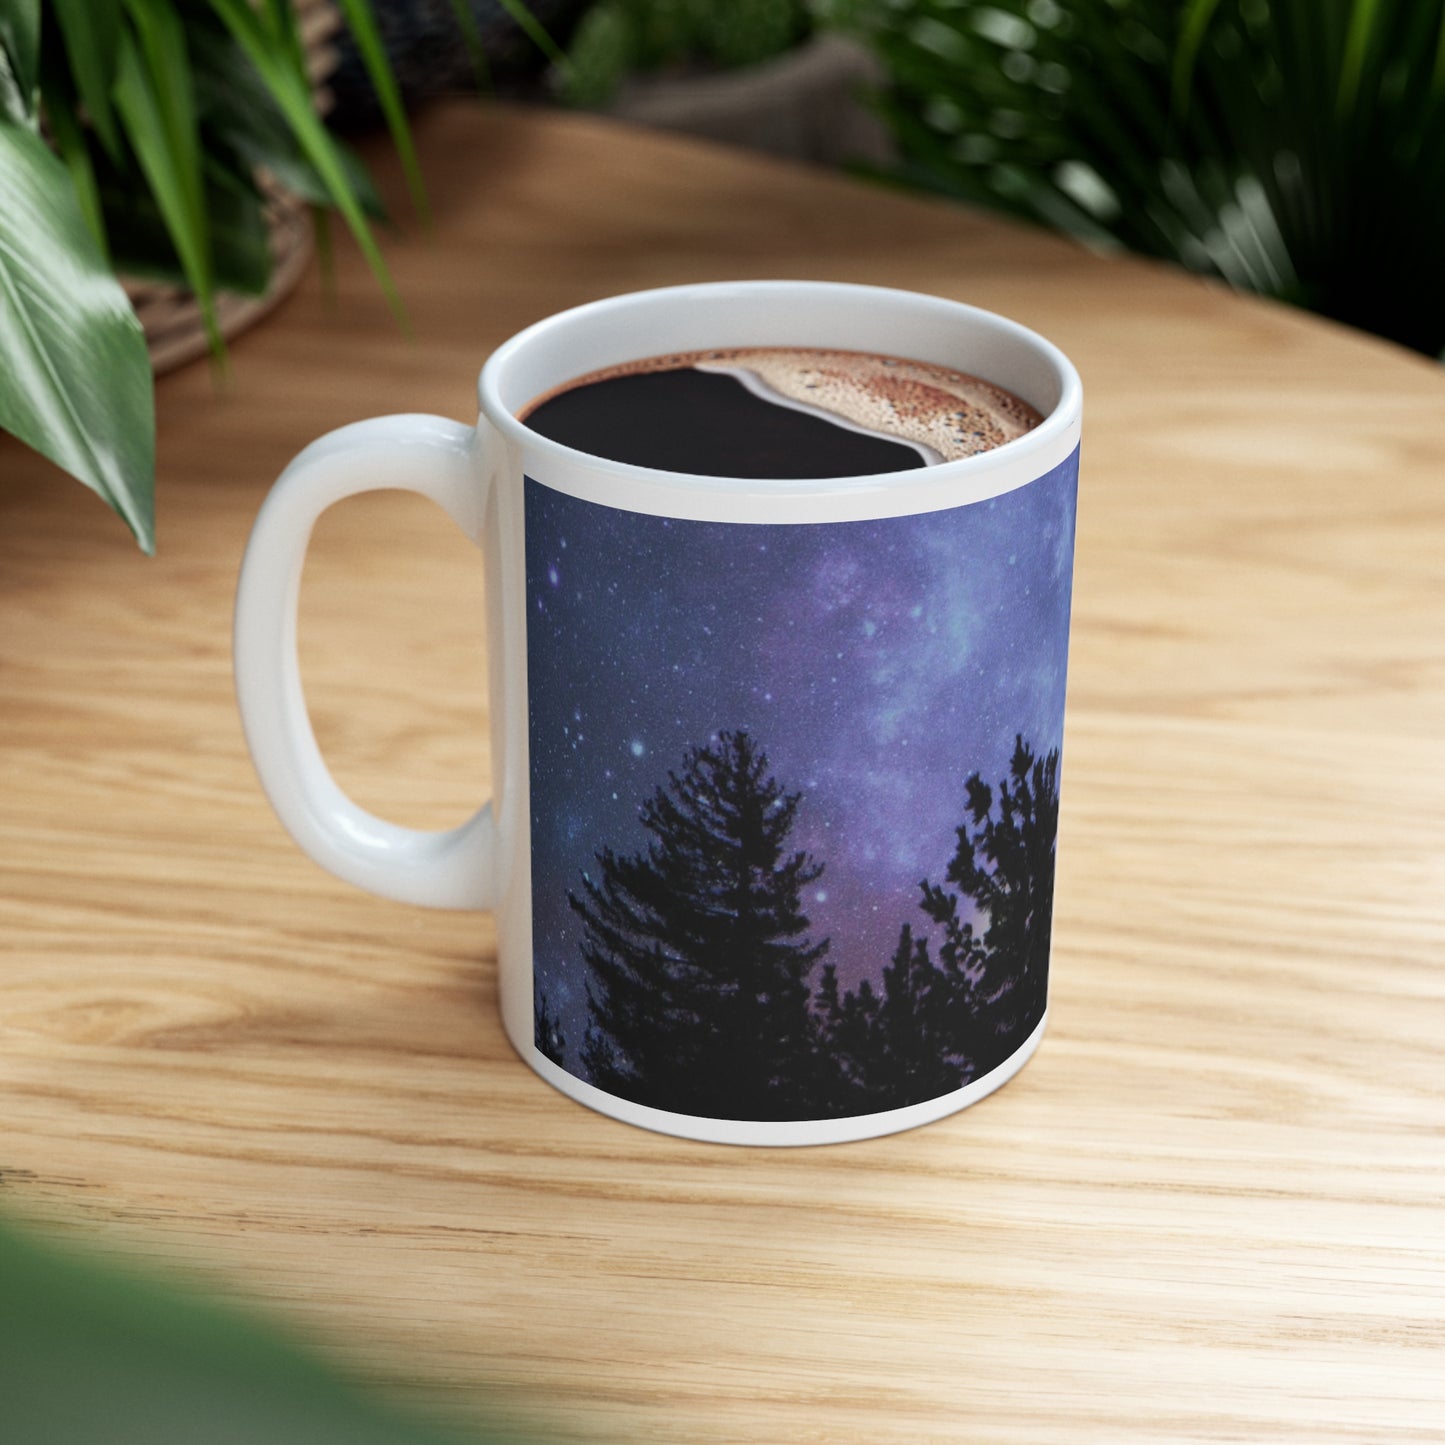 Mock up of the mug filled with a beverage sitting on a wood surface